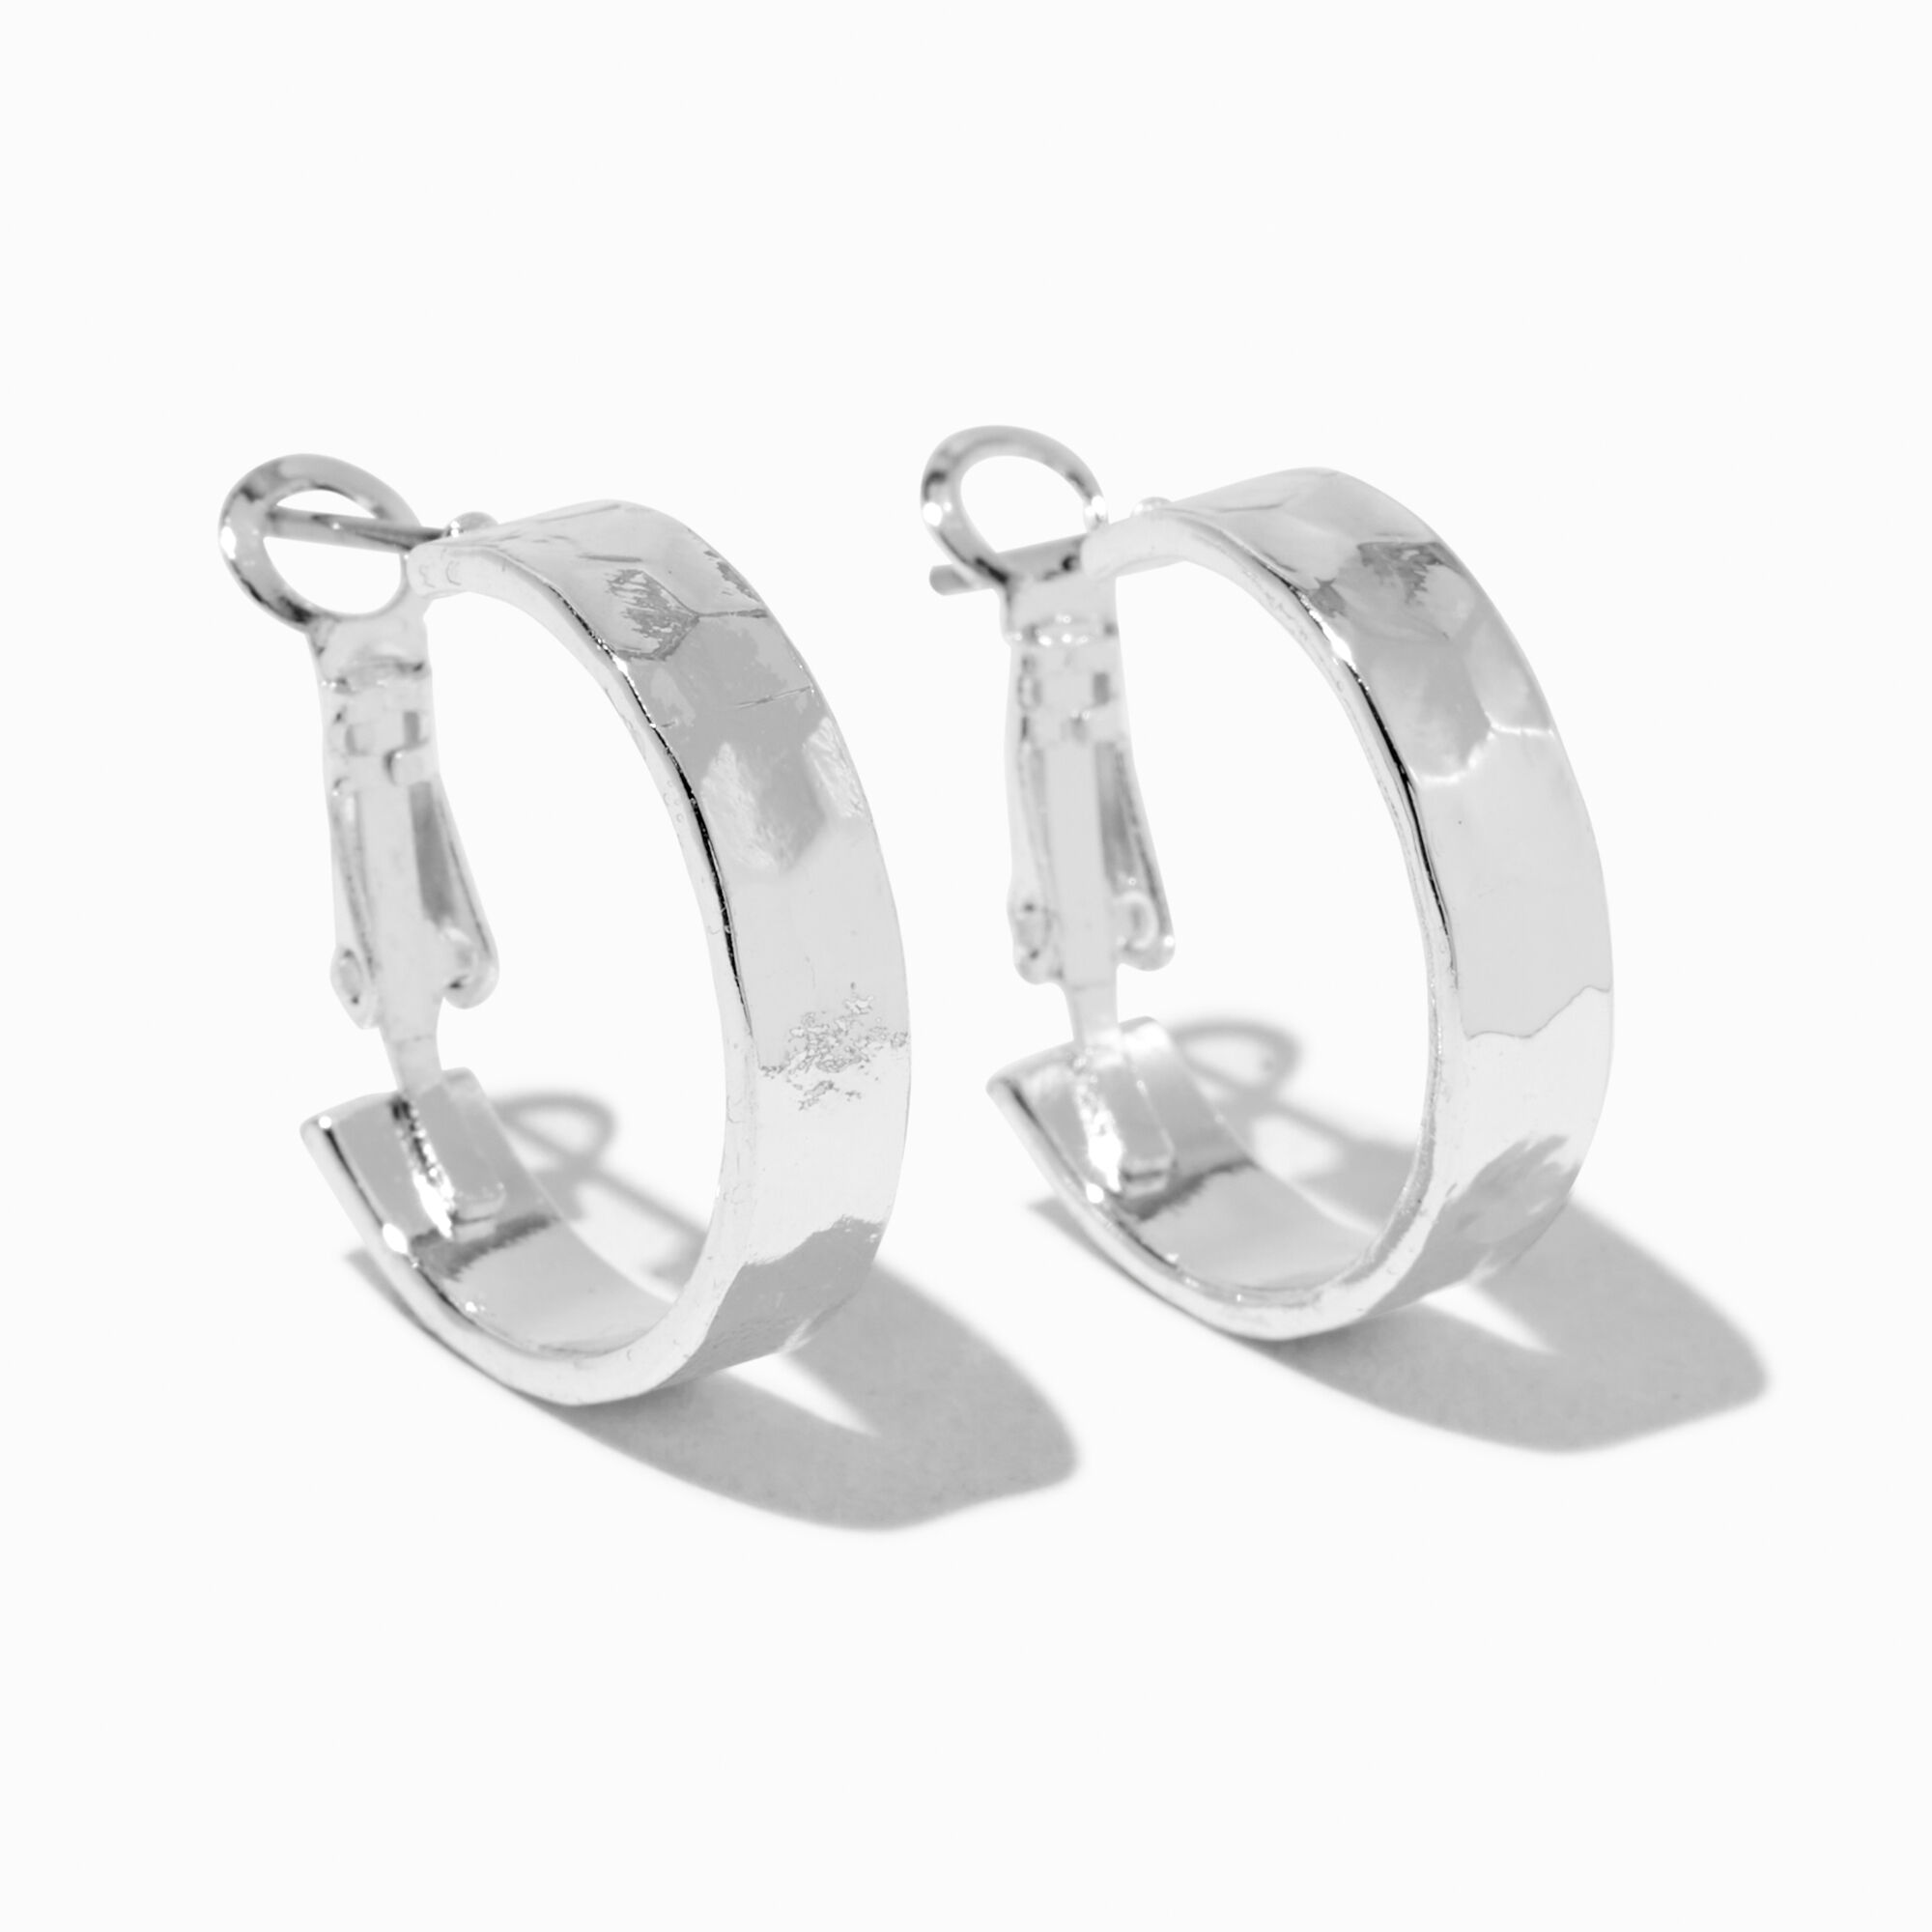 View Claires Tone 20MM Flat Hoop Earrings Silver information